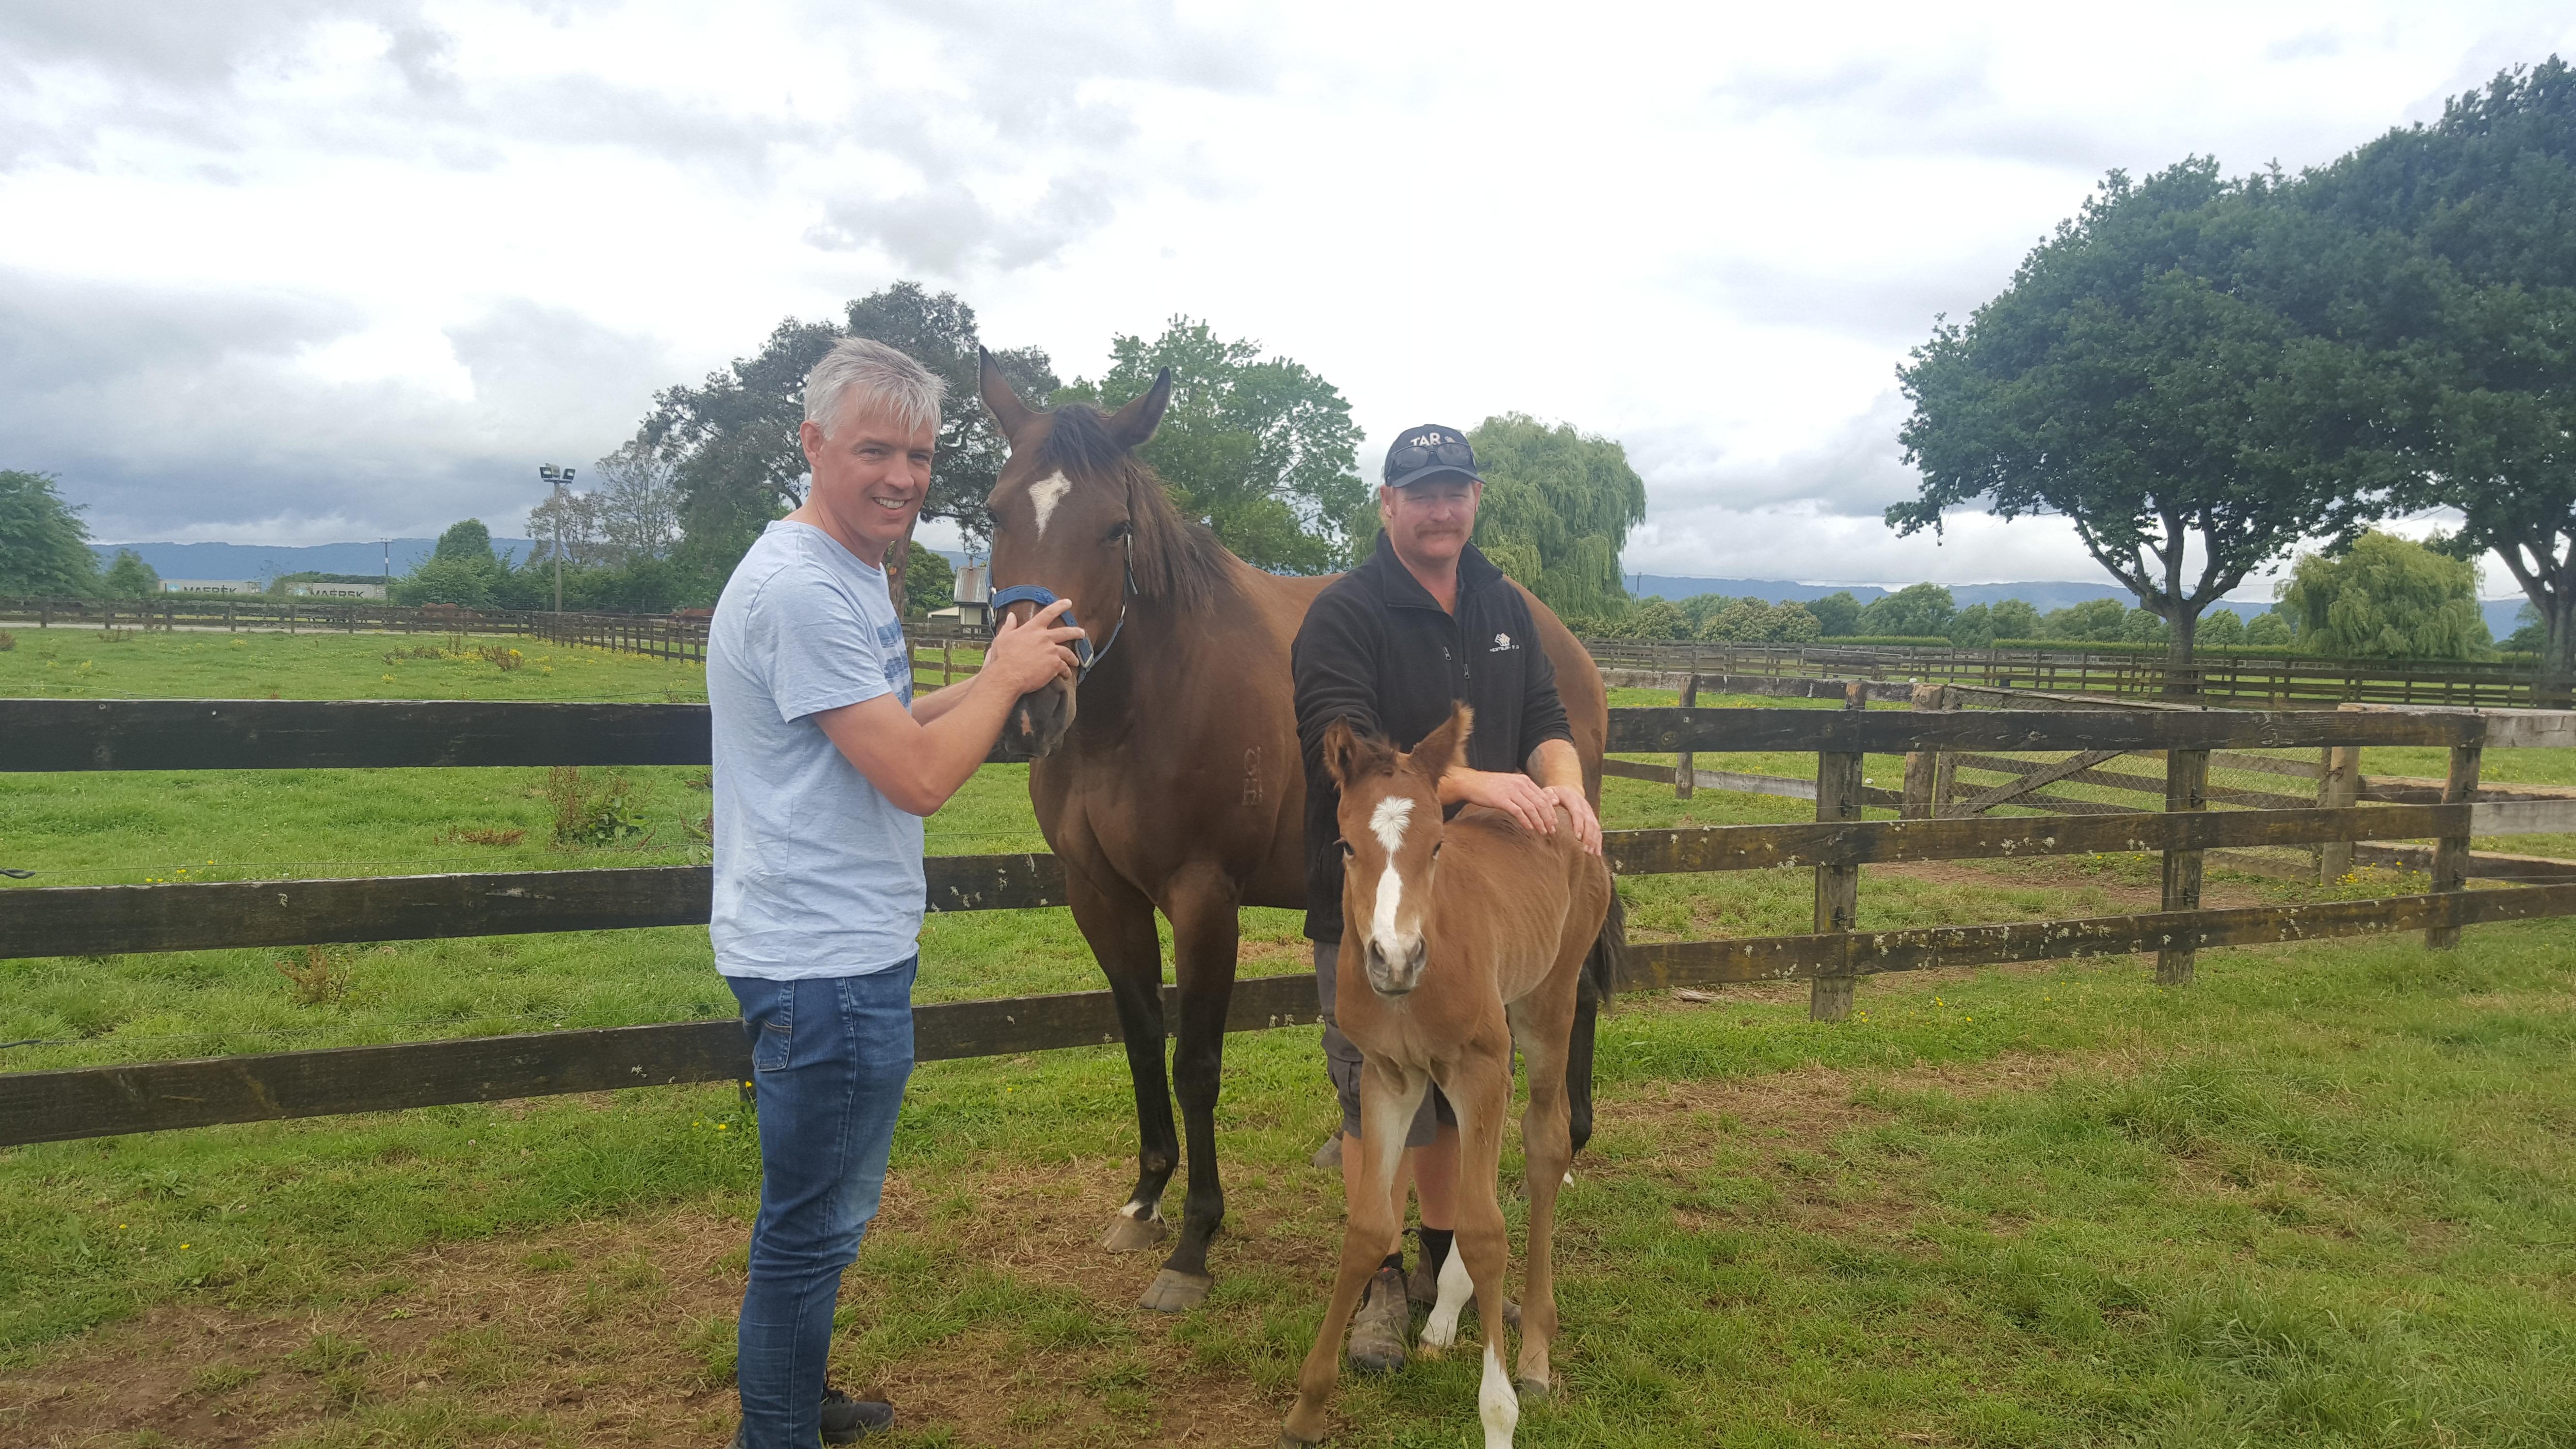 Callum Jones, Farm Manager at Westbury Stud in New Zealand, right, and Dr. Martin Nielsen